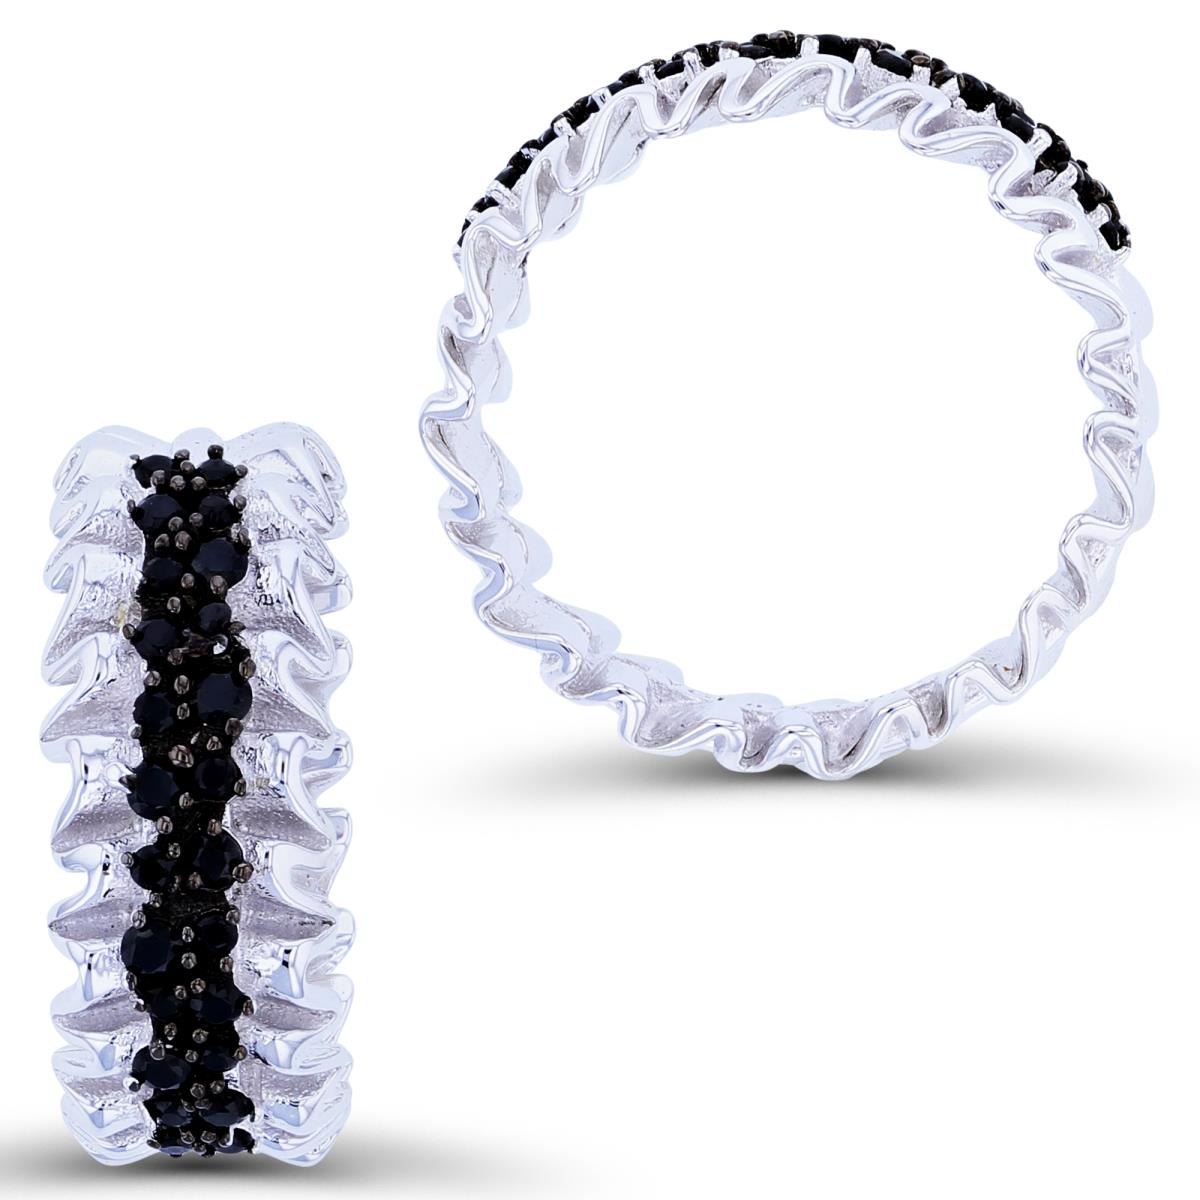 Sterling Silver Two-Tone Rnd Black Spinel Row Center & Alternate Polish/Satin on Waved Sides Band